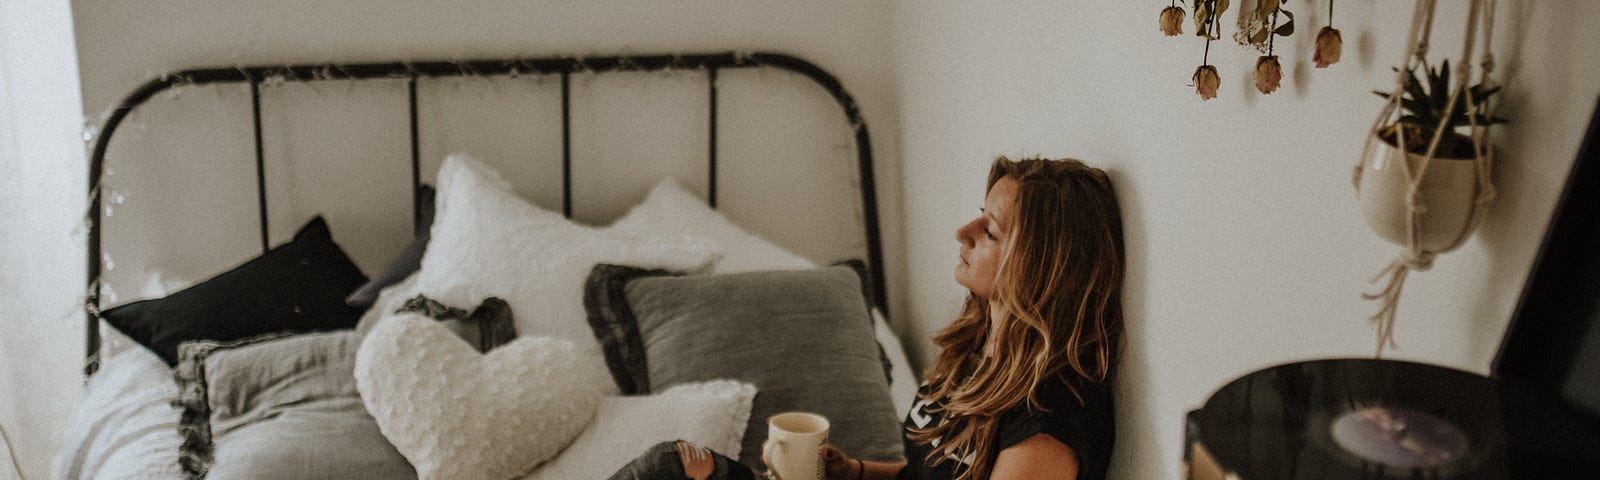 A white woman, wearing a black shirt and jeans, sits on her bed, holding a notebook and cup of coffee. She is gazing out the window. On the bed are grey and white cushions. On the wall behind her is some plant decorations. Next to the bed is a crate with a vintage record player on it.